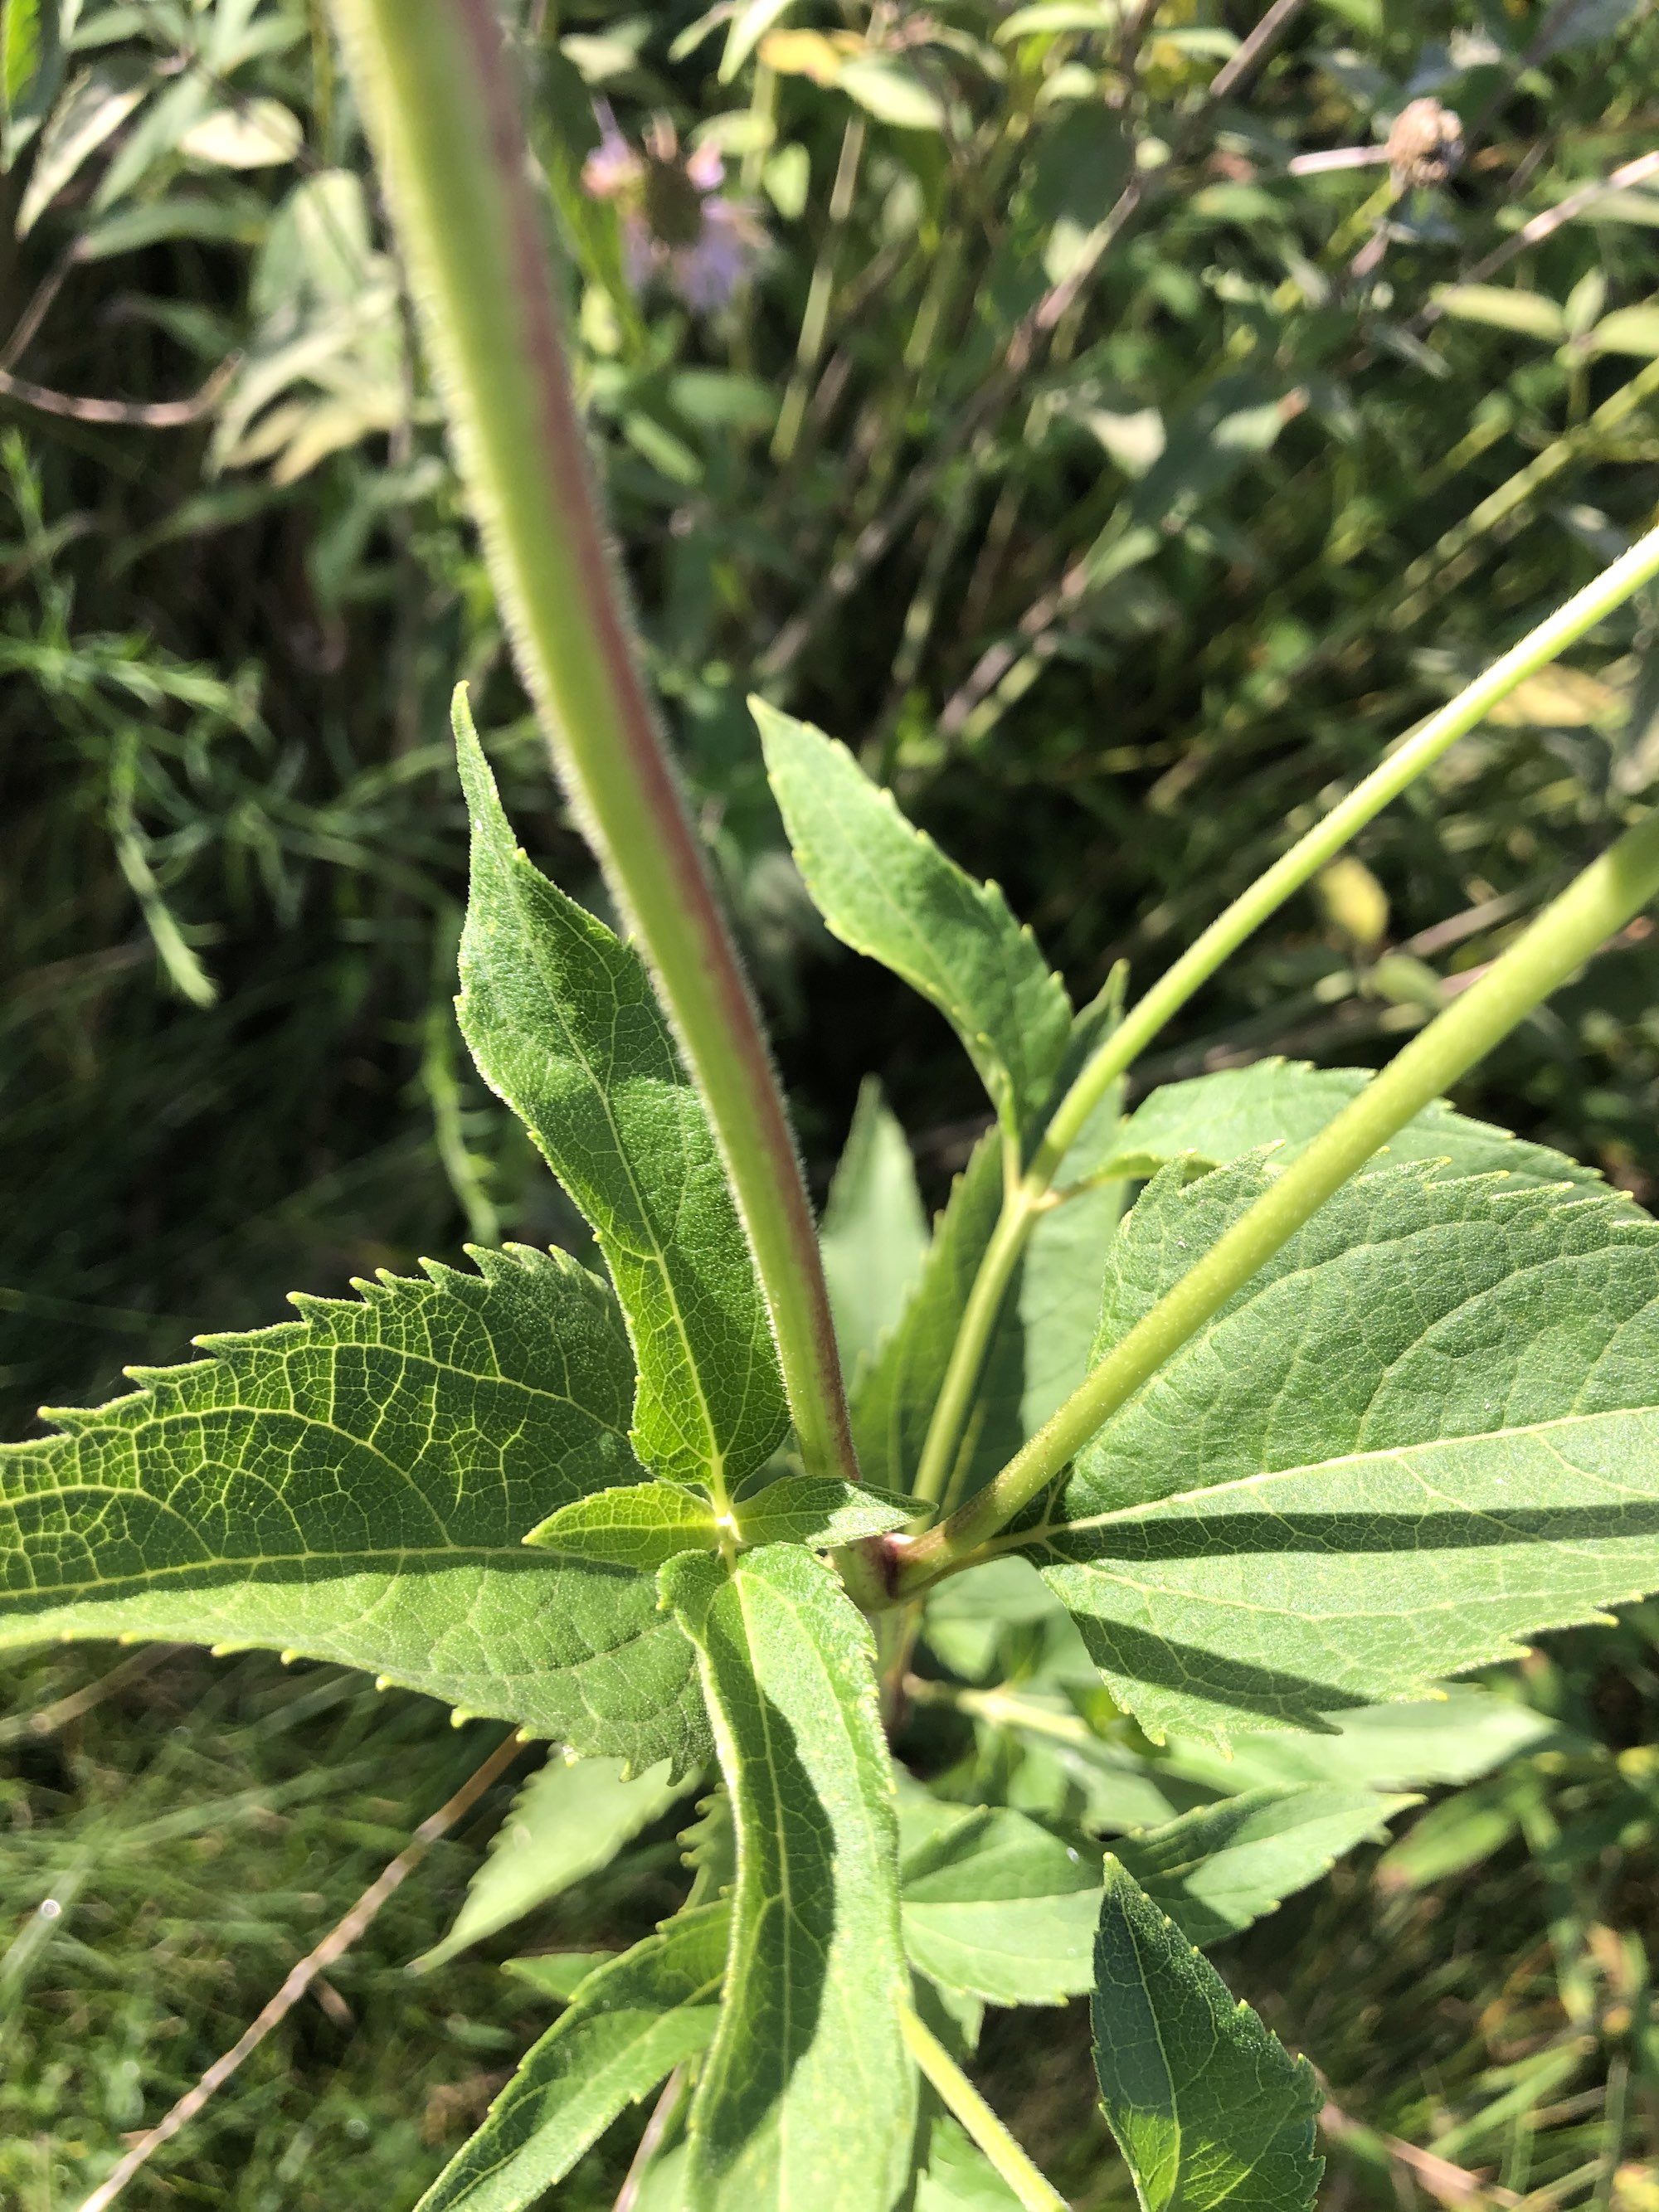 False Sunflower stem and leaves on shore of retaining pond in Madison, Wisconsin on July 31, 2020.